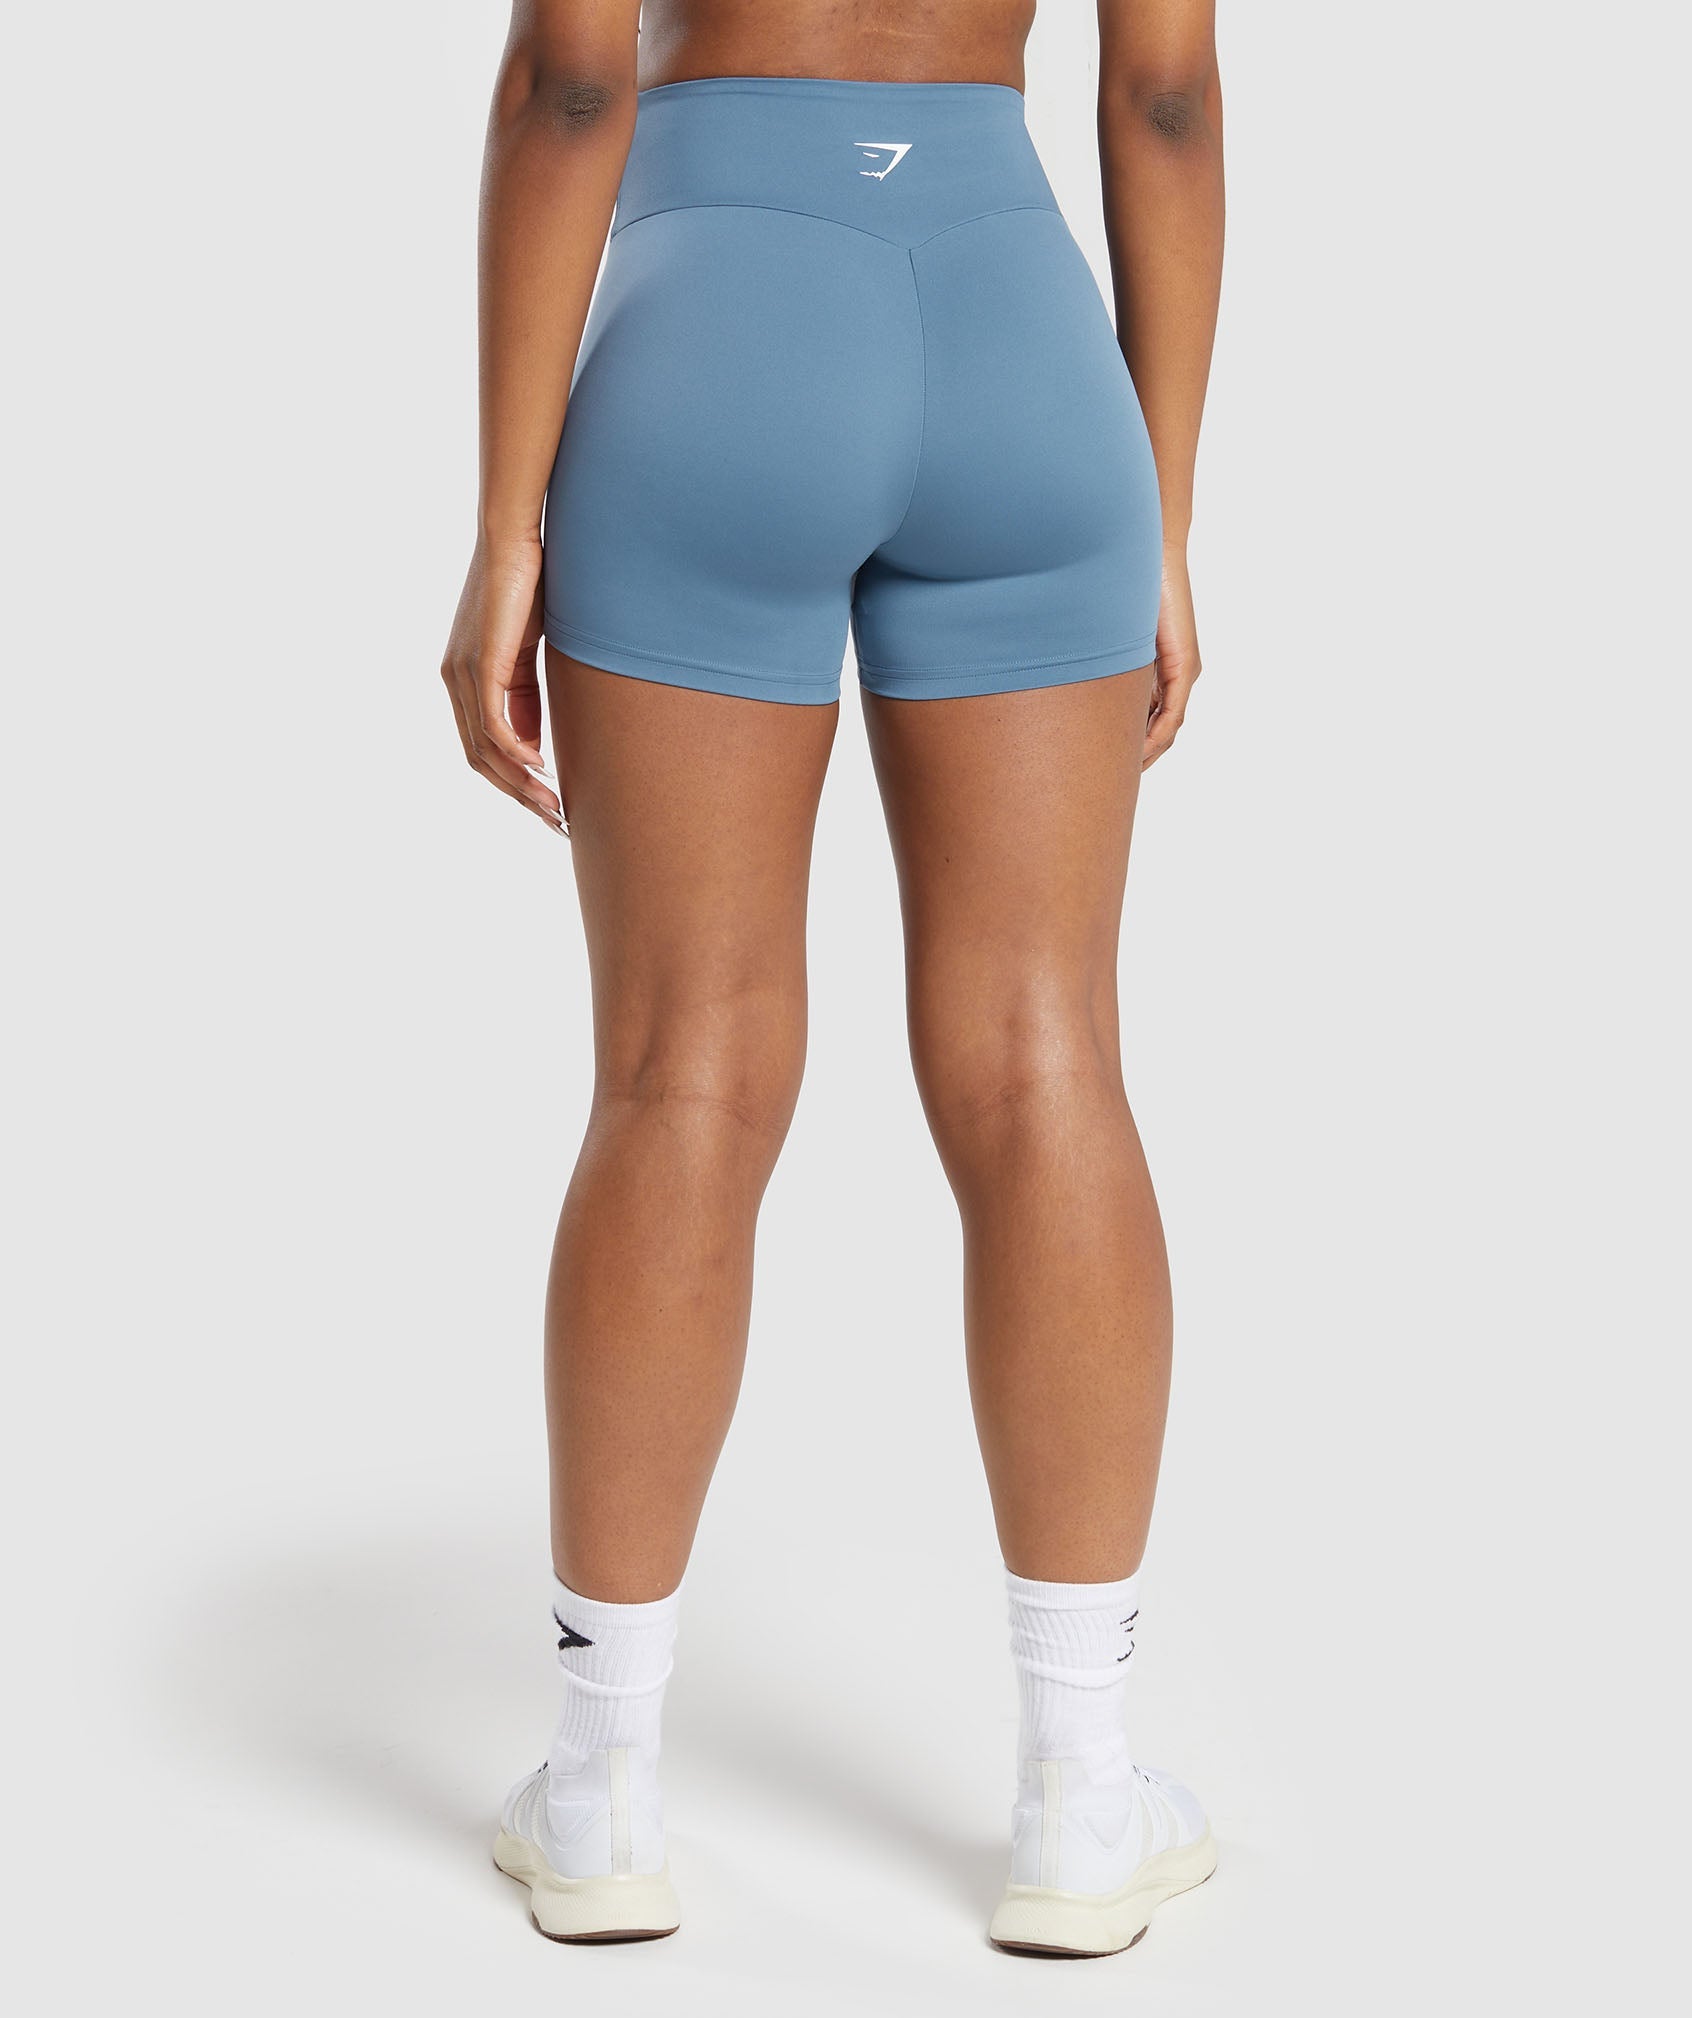 Booty Shorts - Highlight your Glutes